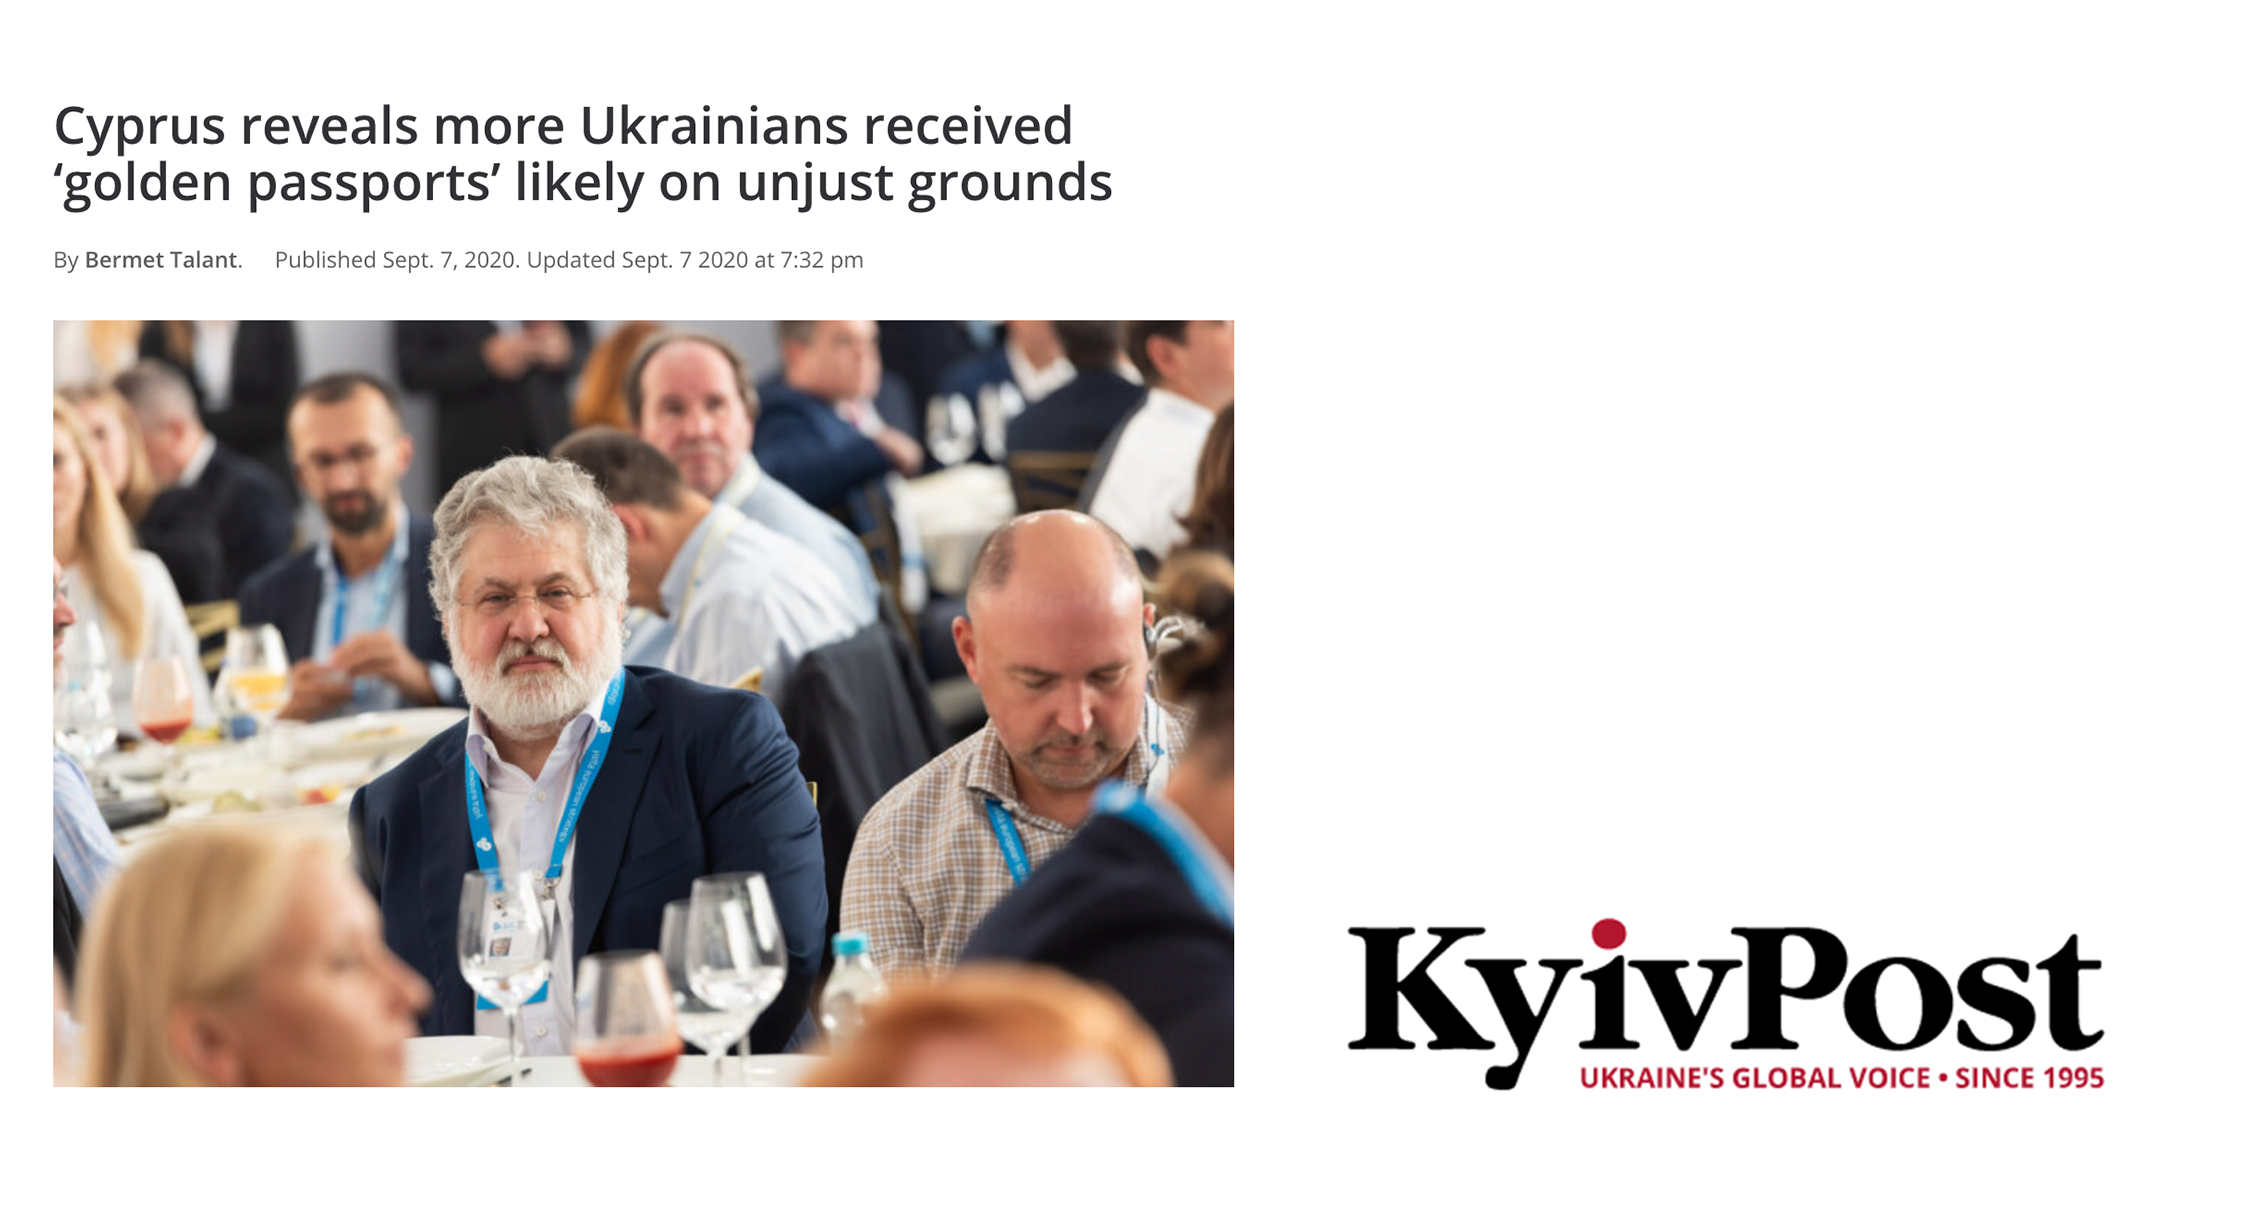 Kyiv Post: Cyprus reveals more Ukrainians received ‘golden passports’ likely on unjust grounds